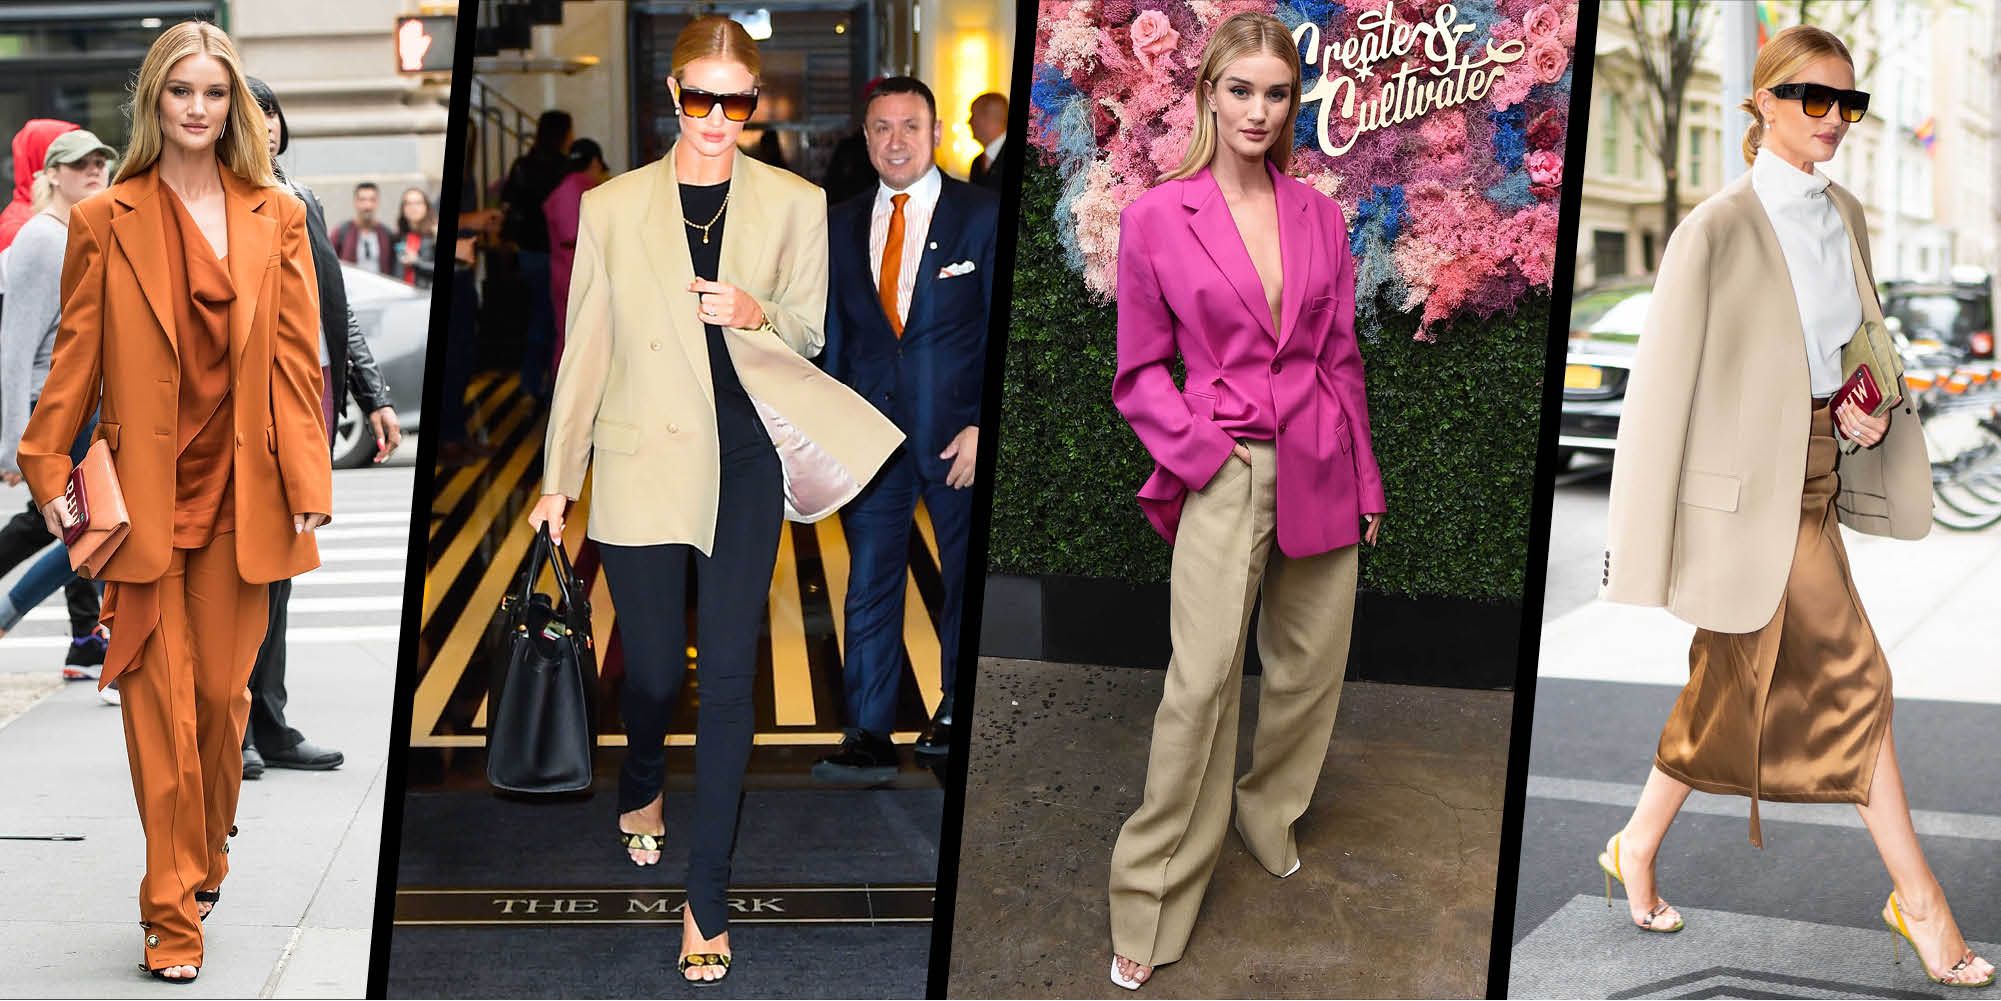 Rosie Huntington-Whiteley in mauve suit with white leather bag in